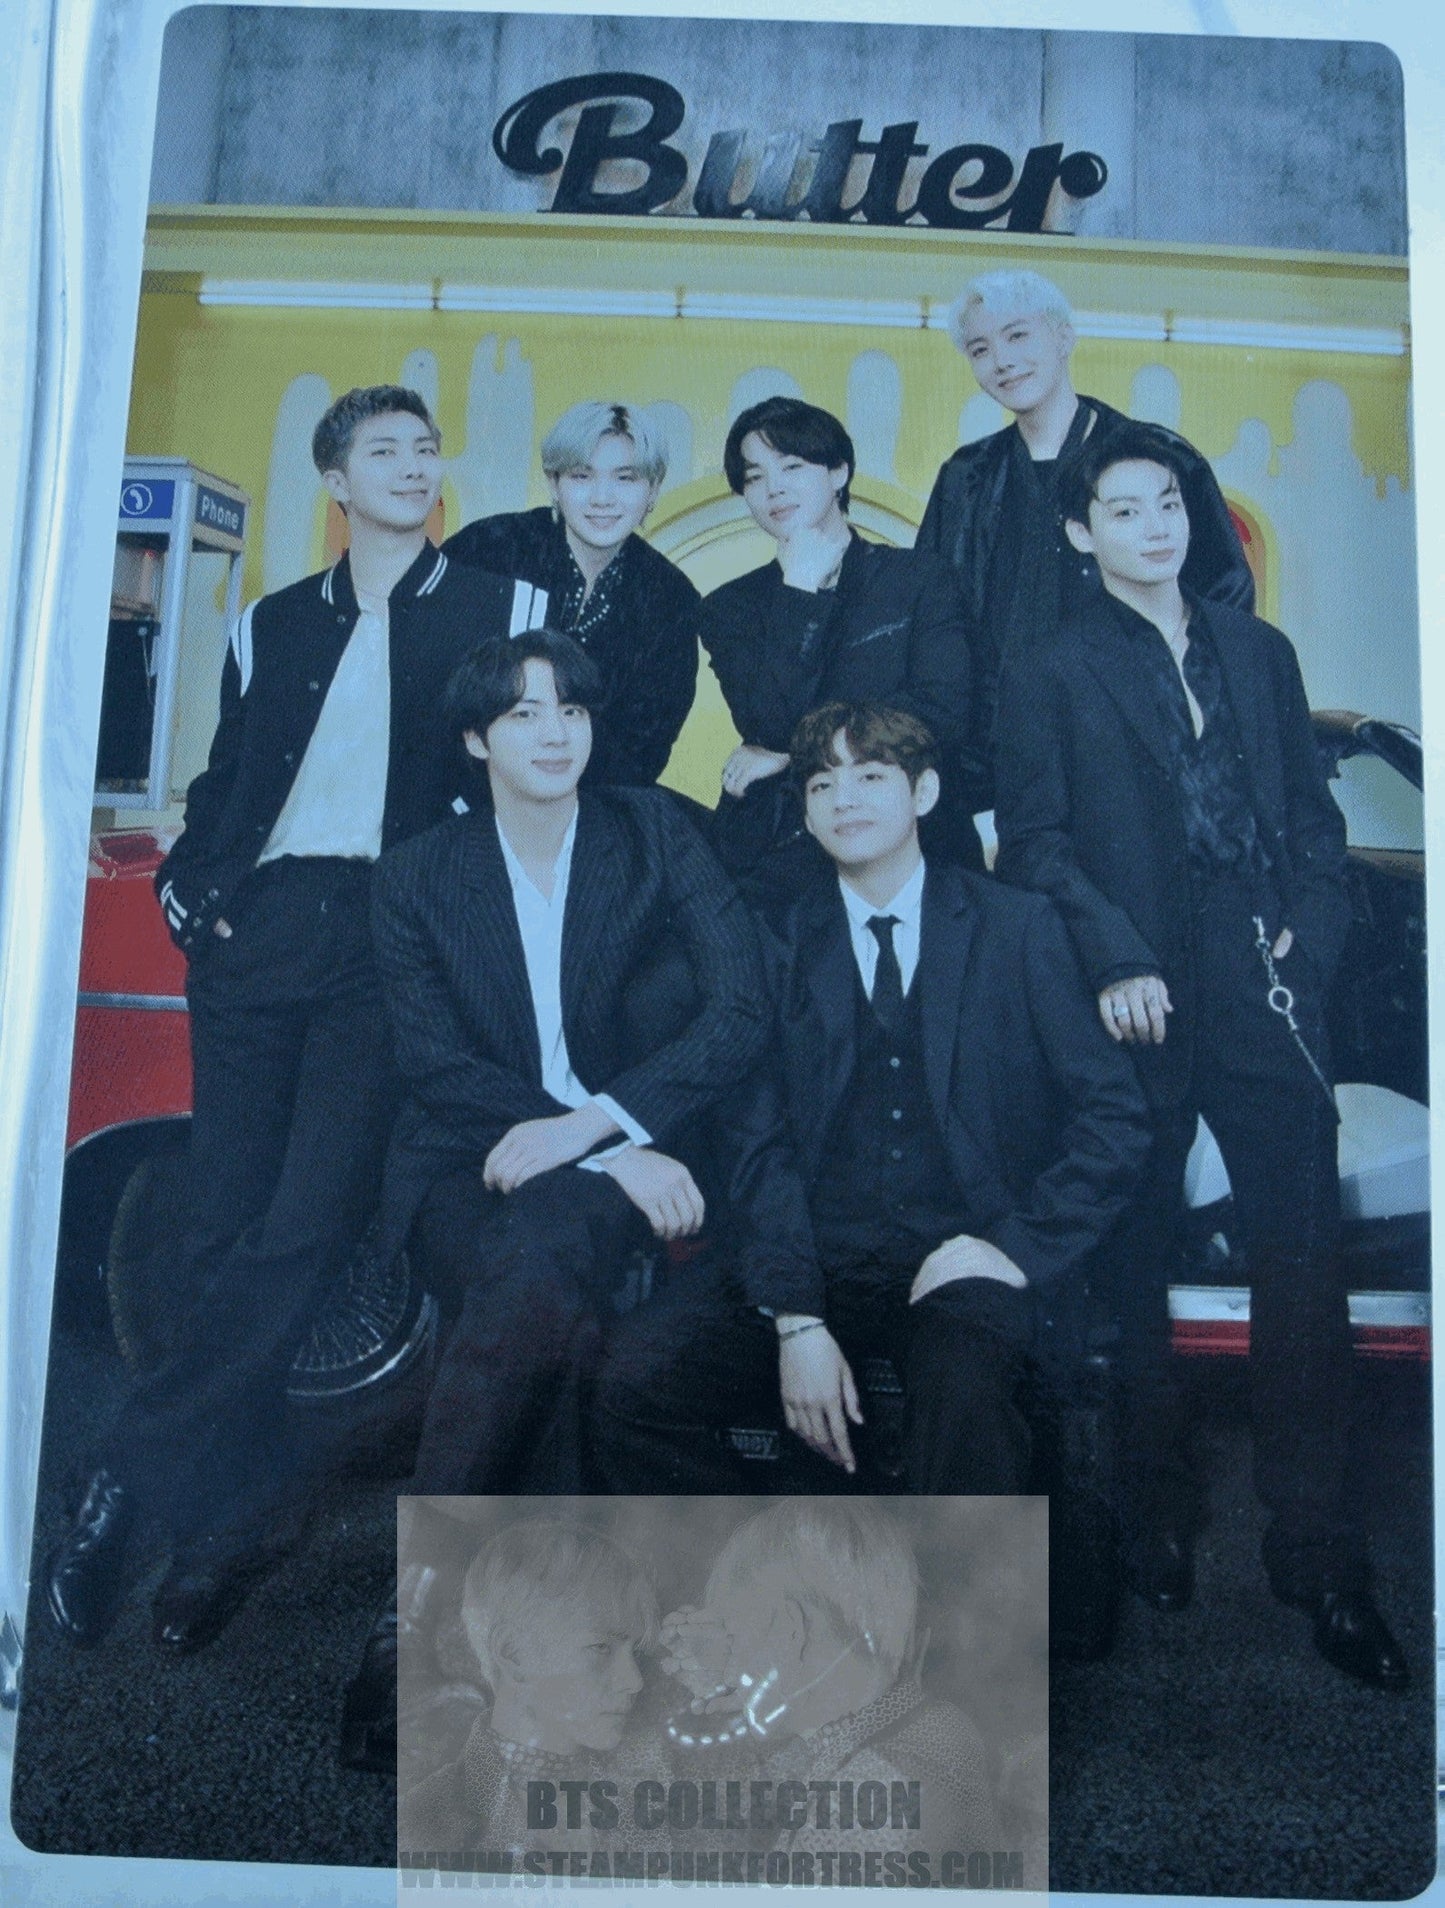 BTS PERMISSION TO DANCE PTD ON STAGE SEOUL JIN SUGA J-HOPE RM JIMIN V JUNGKOOK GROUP #2 OF 2 LIMITED EDITION PHOTOCARD PHOTO CARD PC NEW OFFICIAL MERCHANDISE